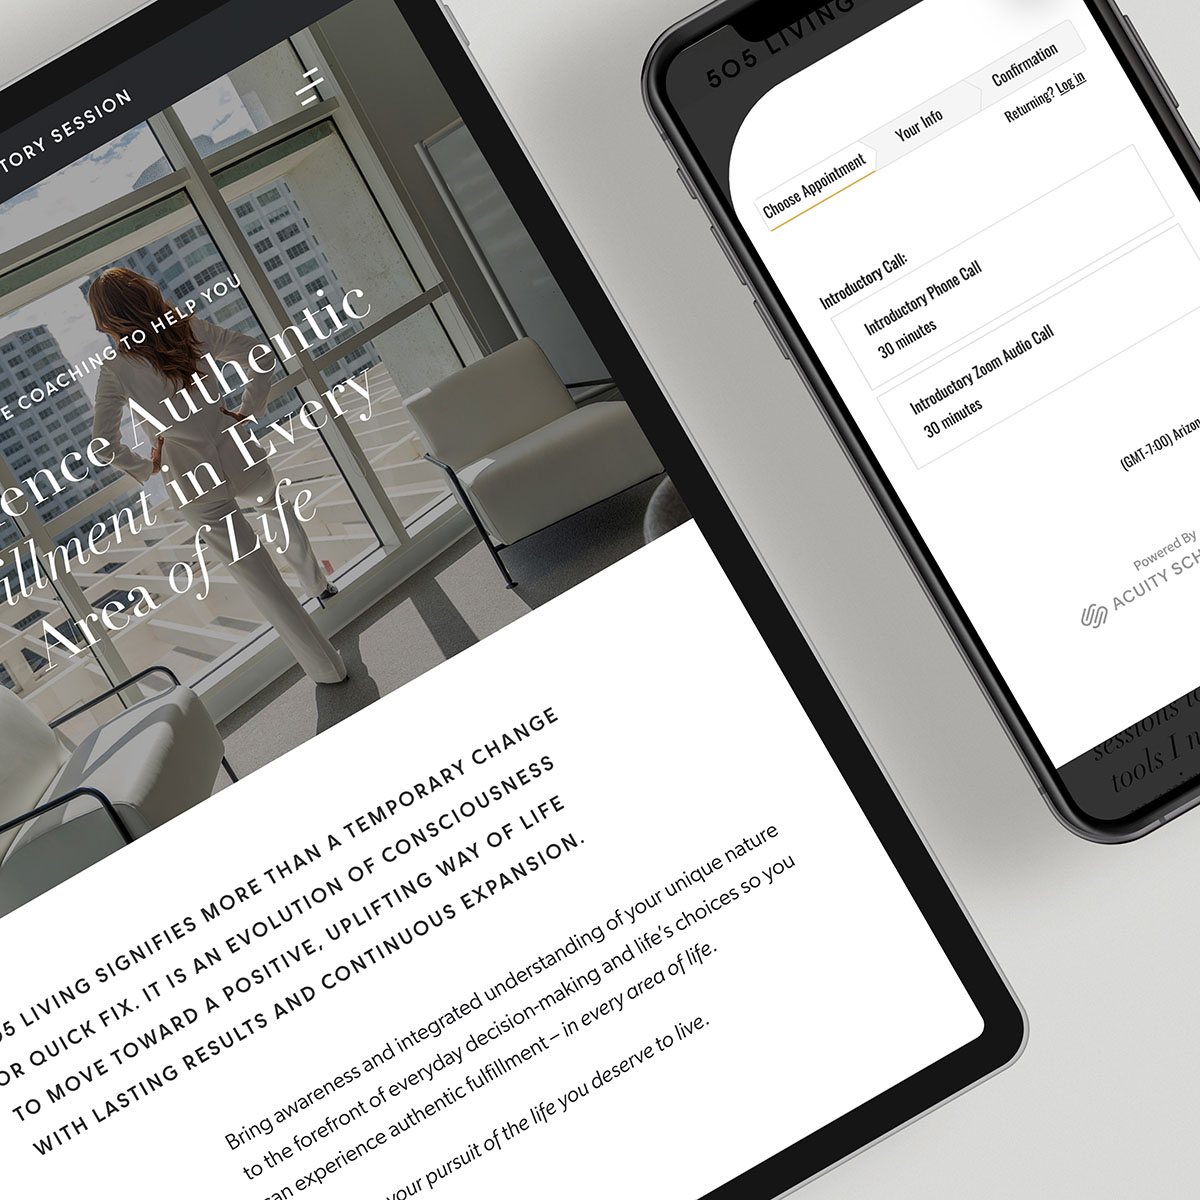 Website mockup tablet ipad mobile iphone with appointment scheduling - Systems Consulting and Integrations - Whiskey and Red Small Business Branding and Website Design Packages